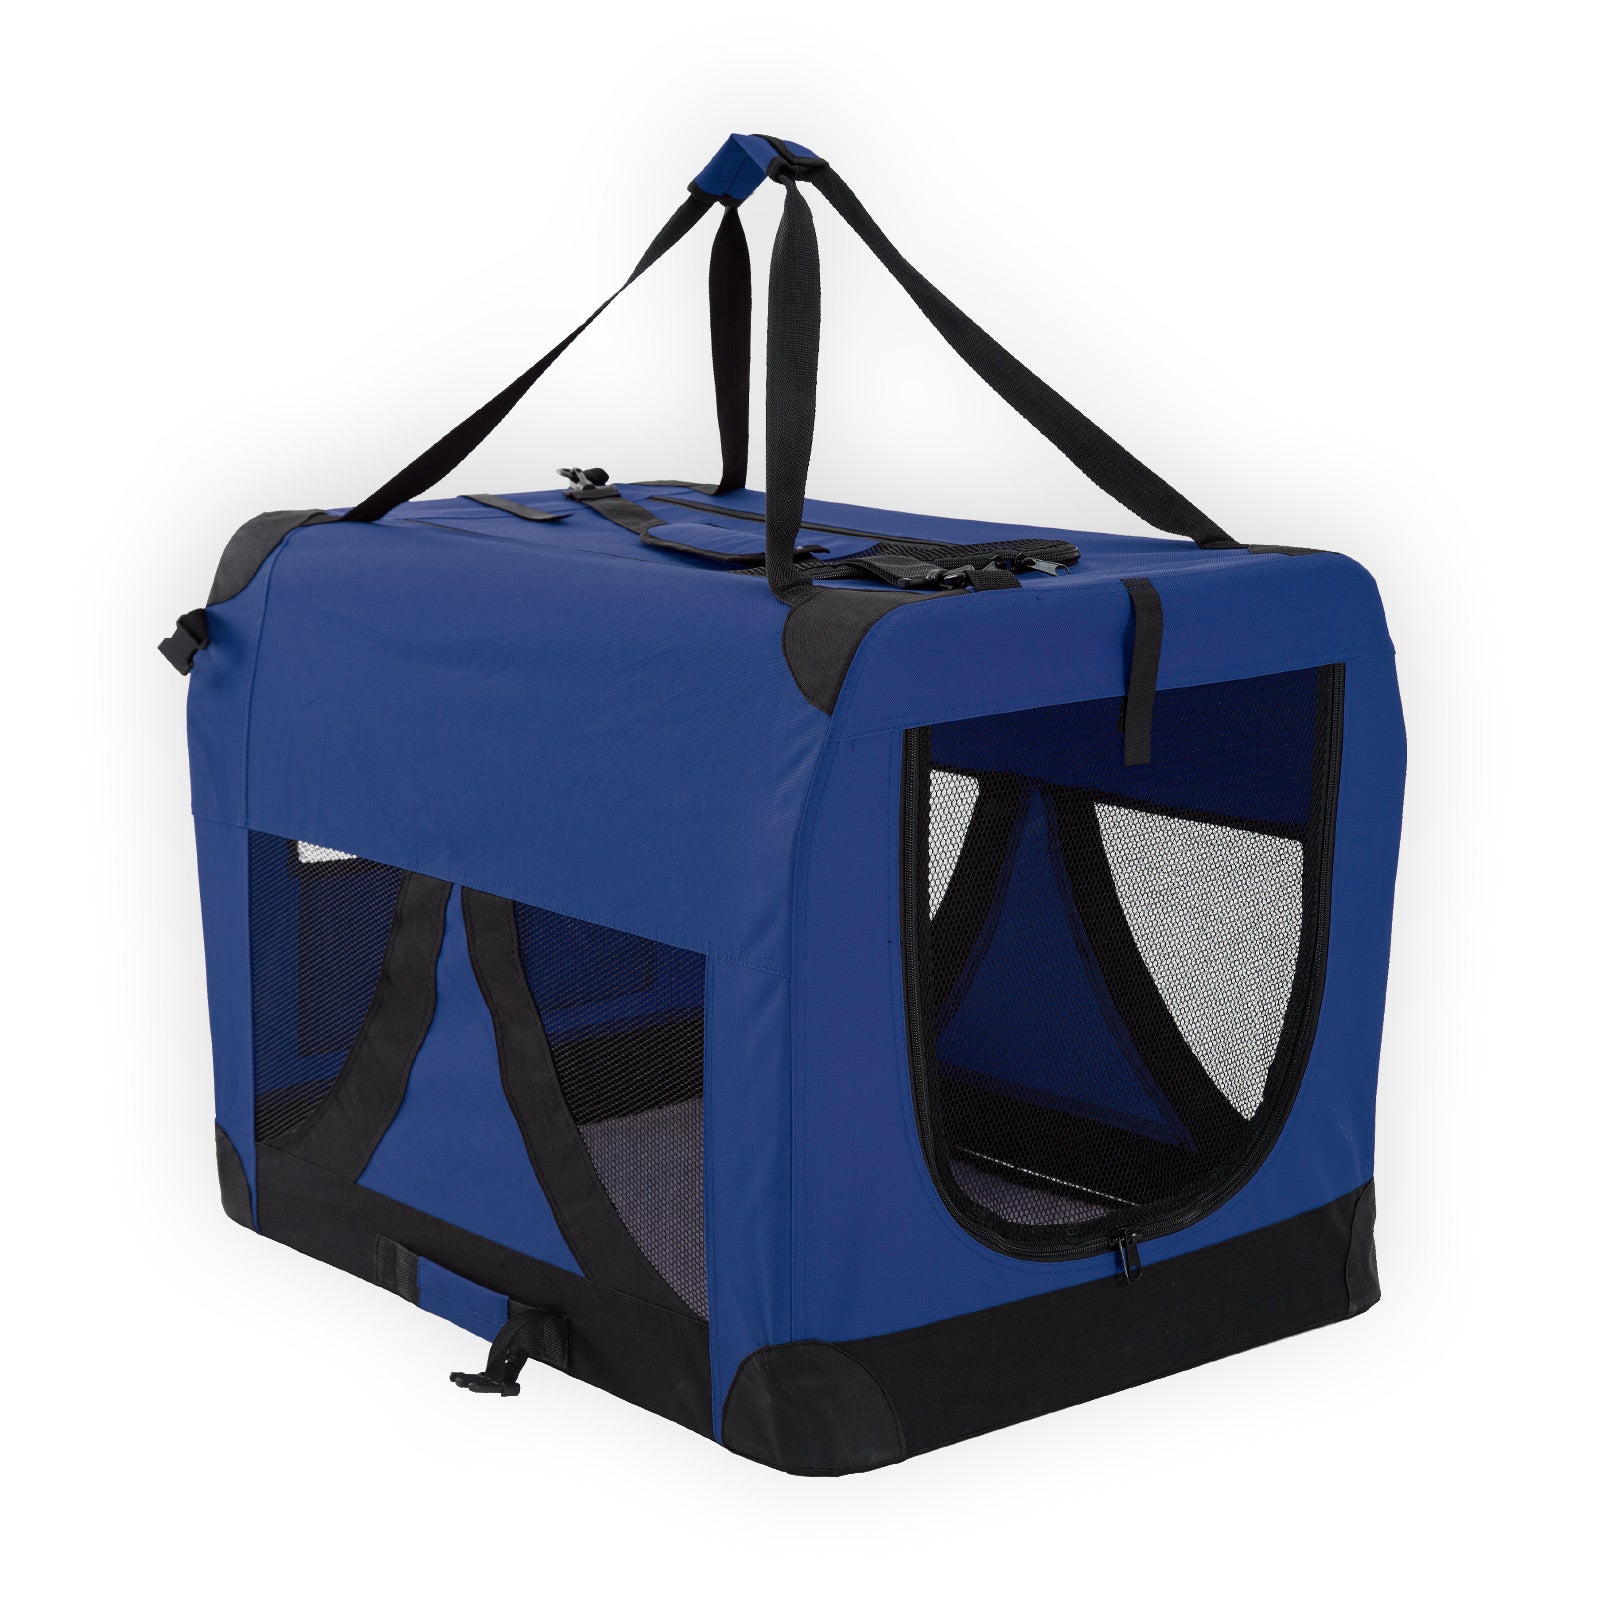 Paw Mate Blue Portable Soft Dog Cage Crate Carrier L